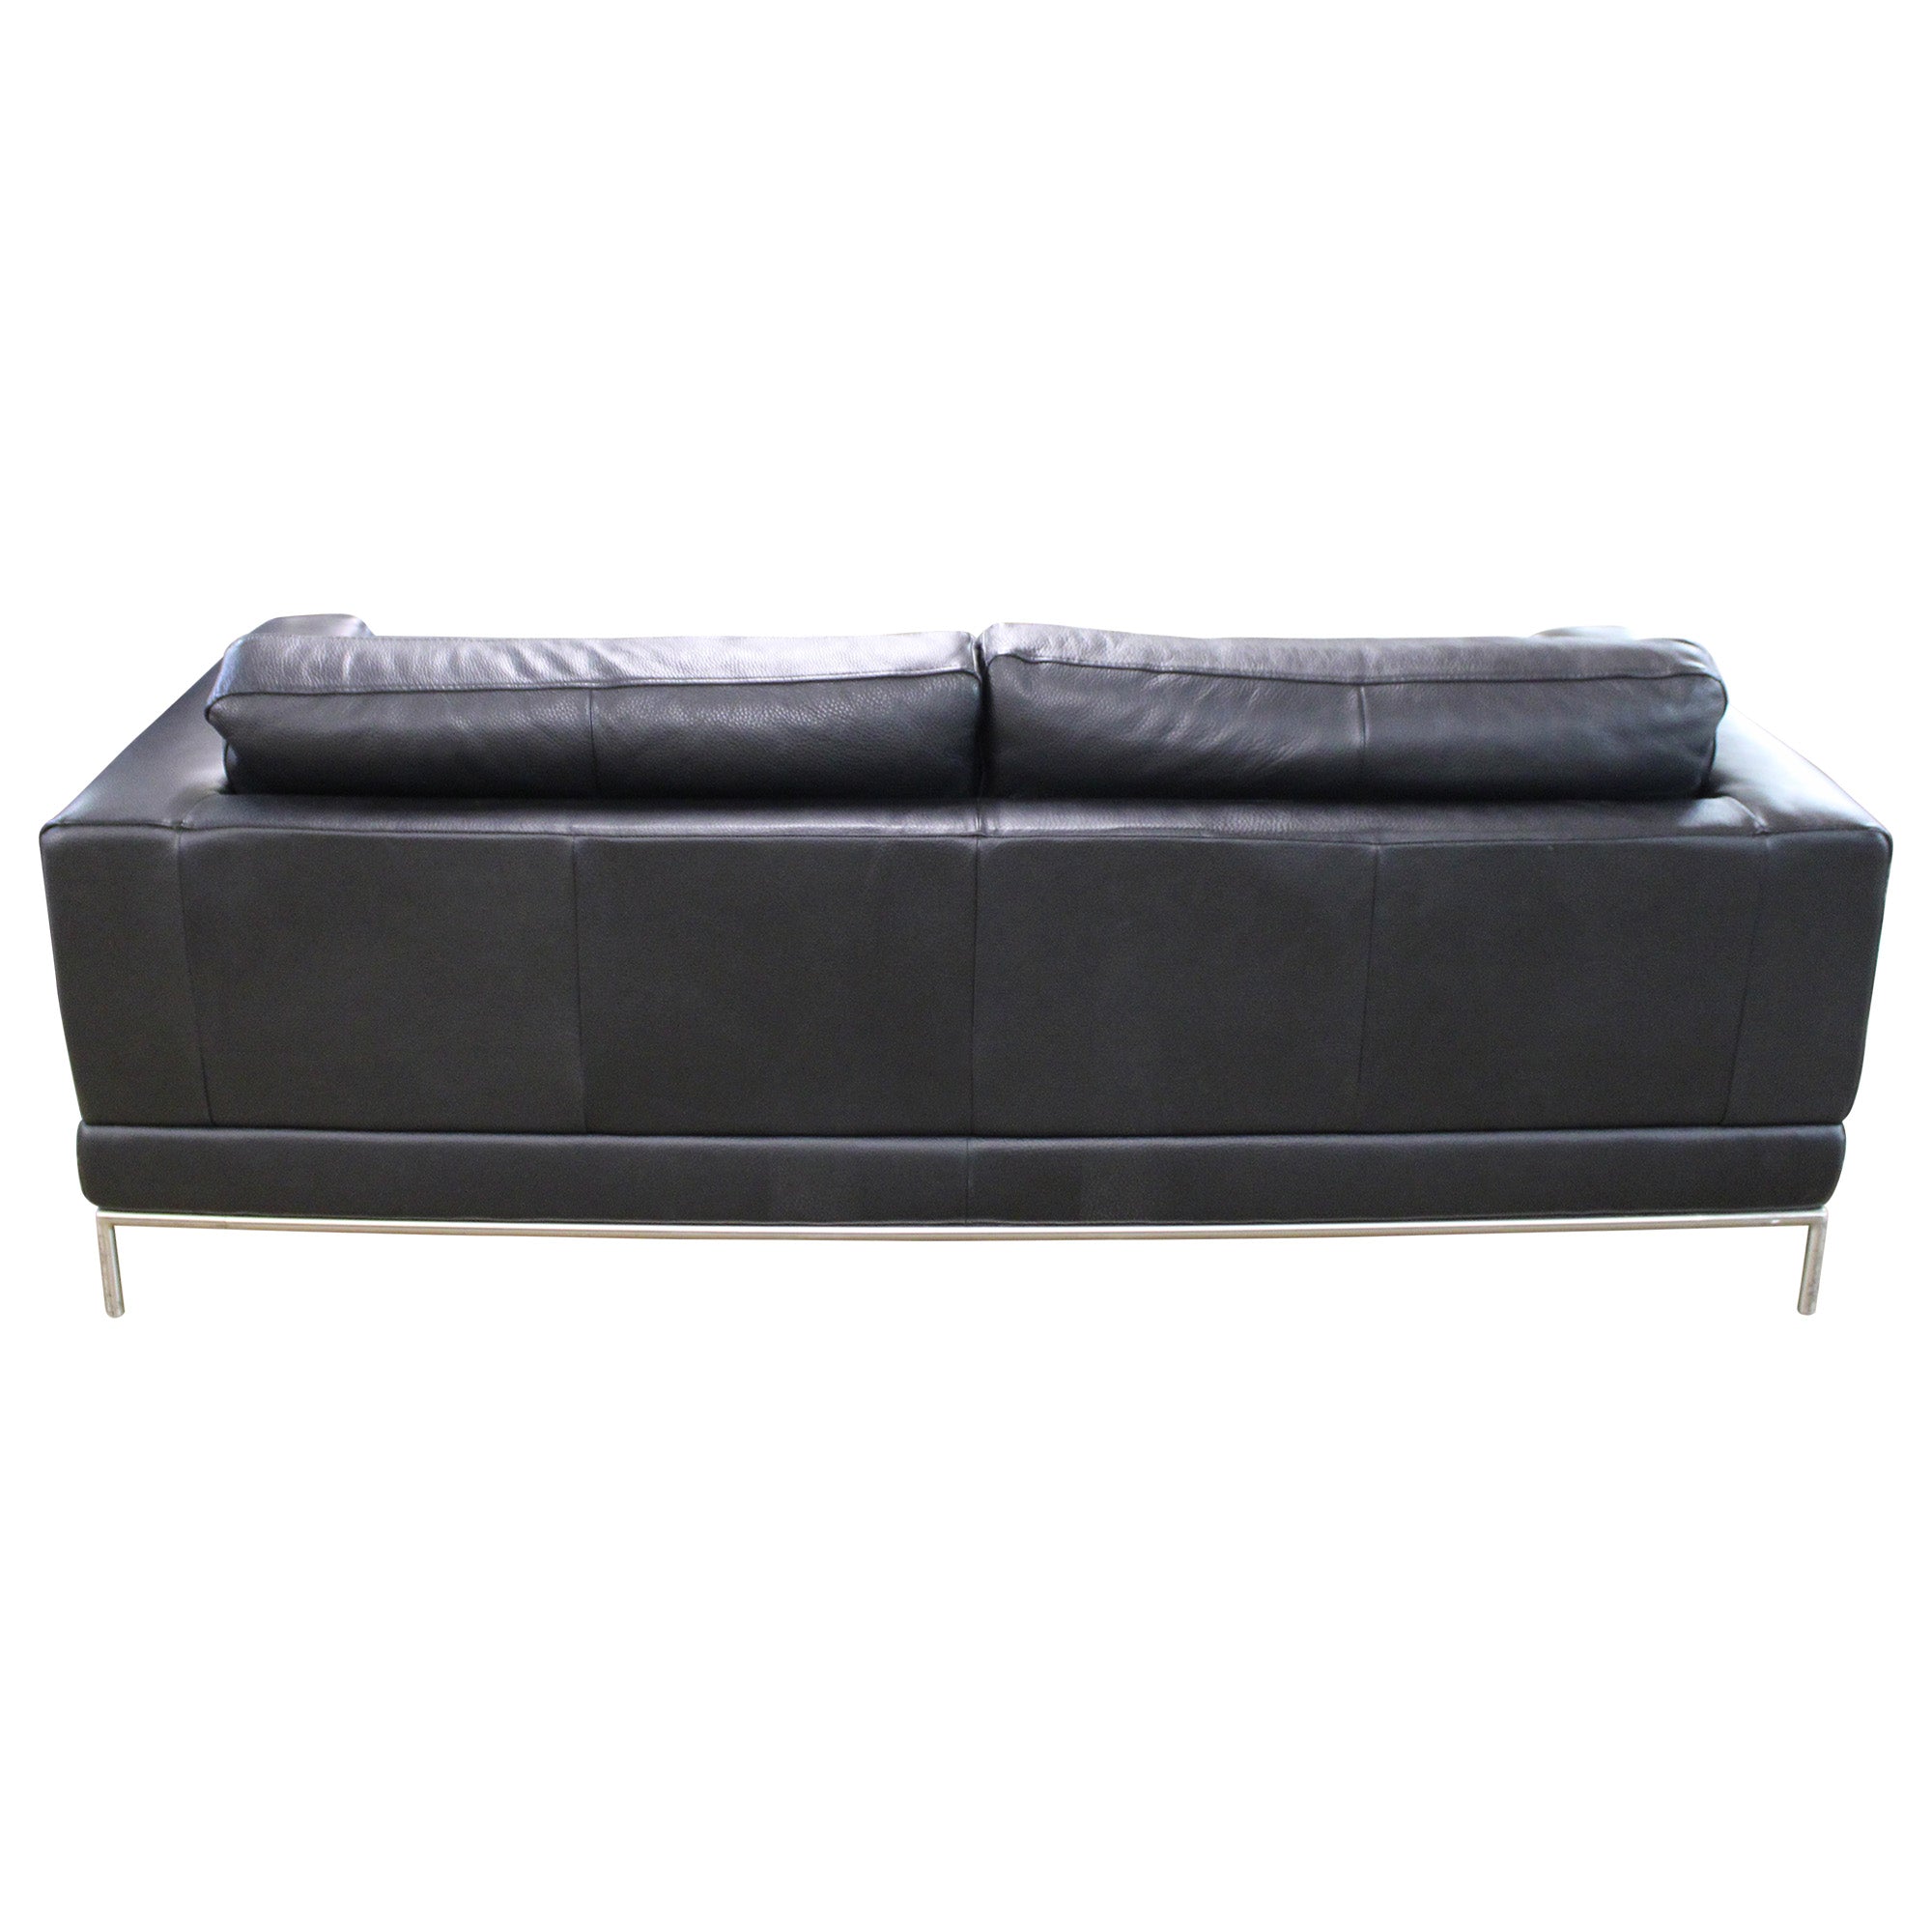 IKEA Arild Black Leather Couch - Preowned Office Furniture